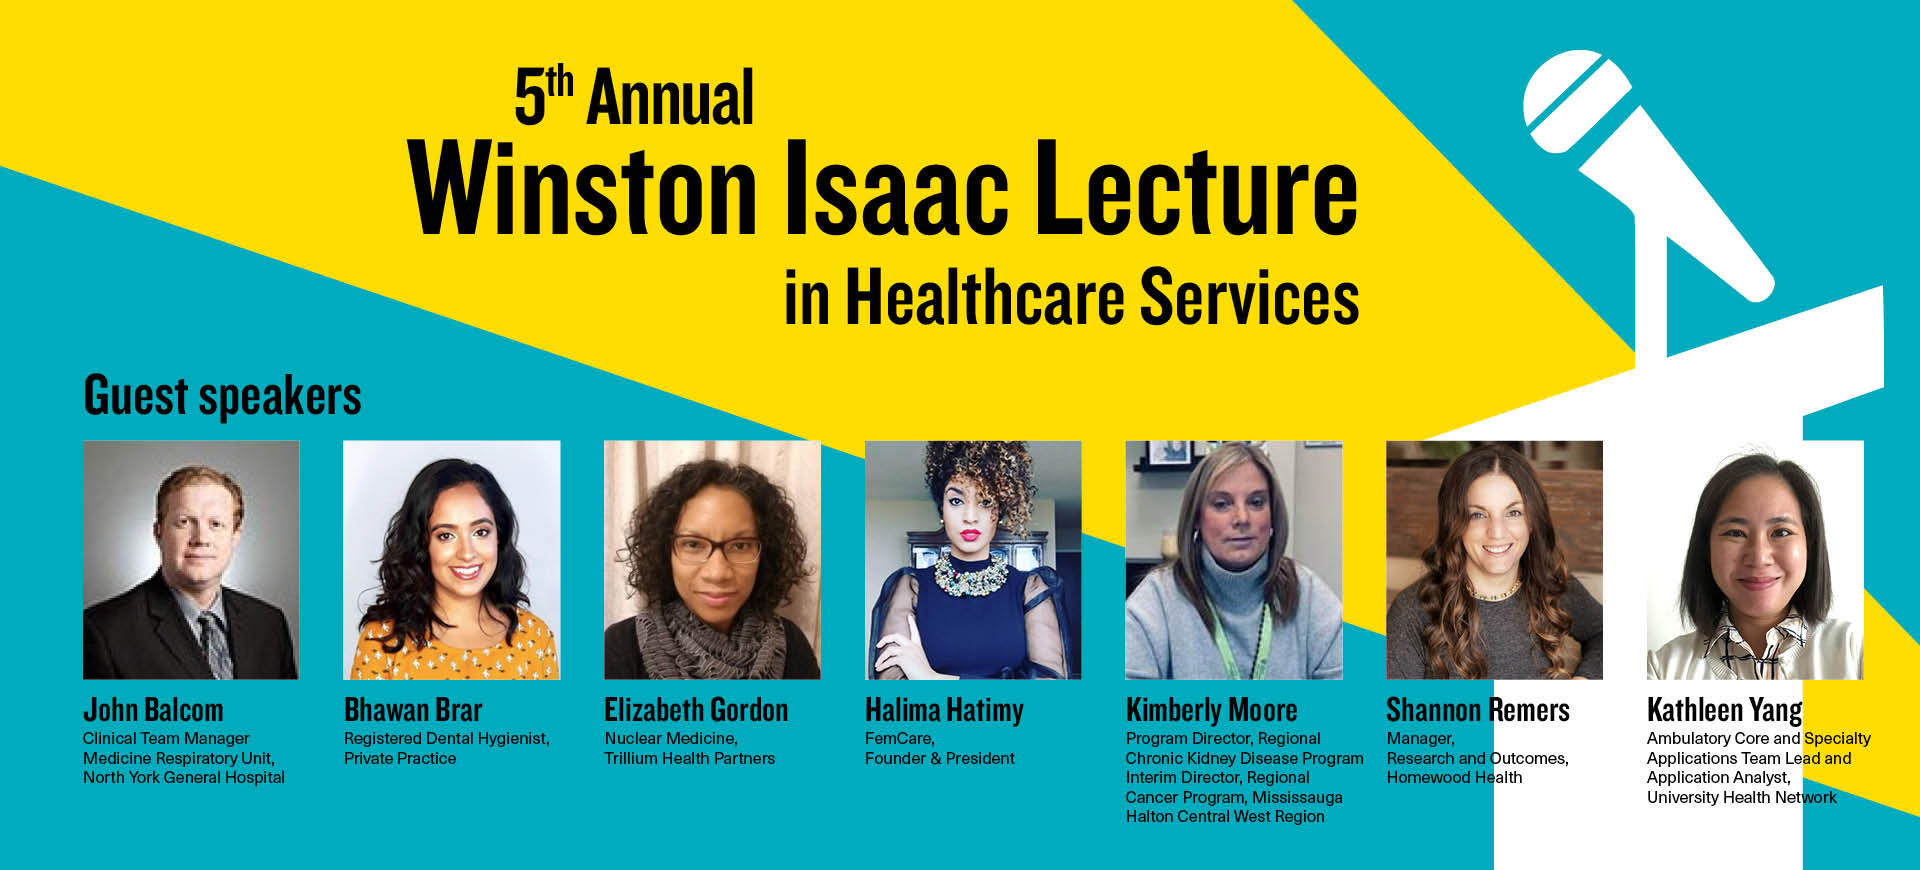 5th Annual Winston Isaac Lecture in Healthcare Services